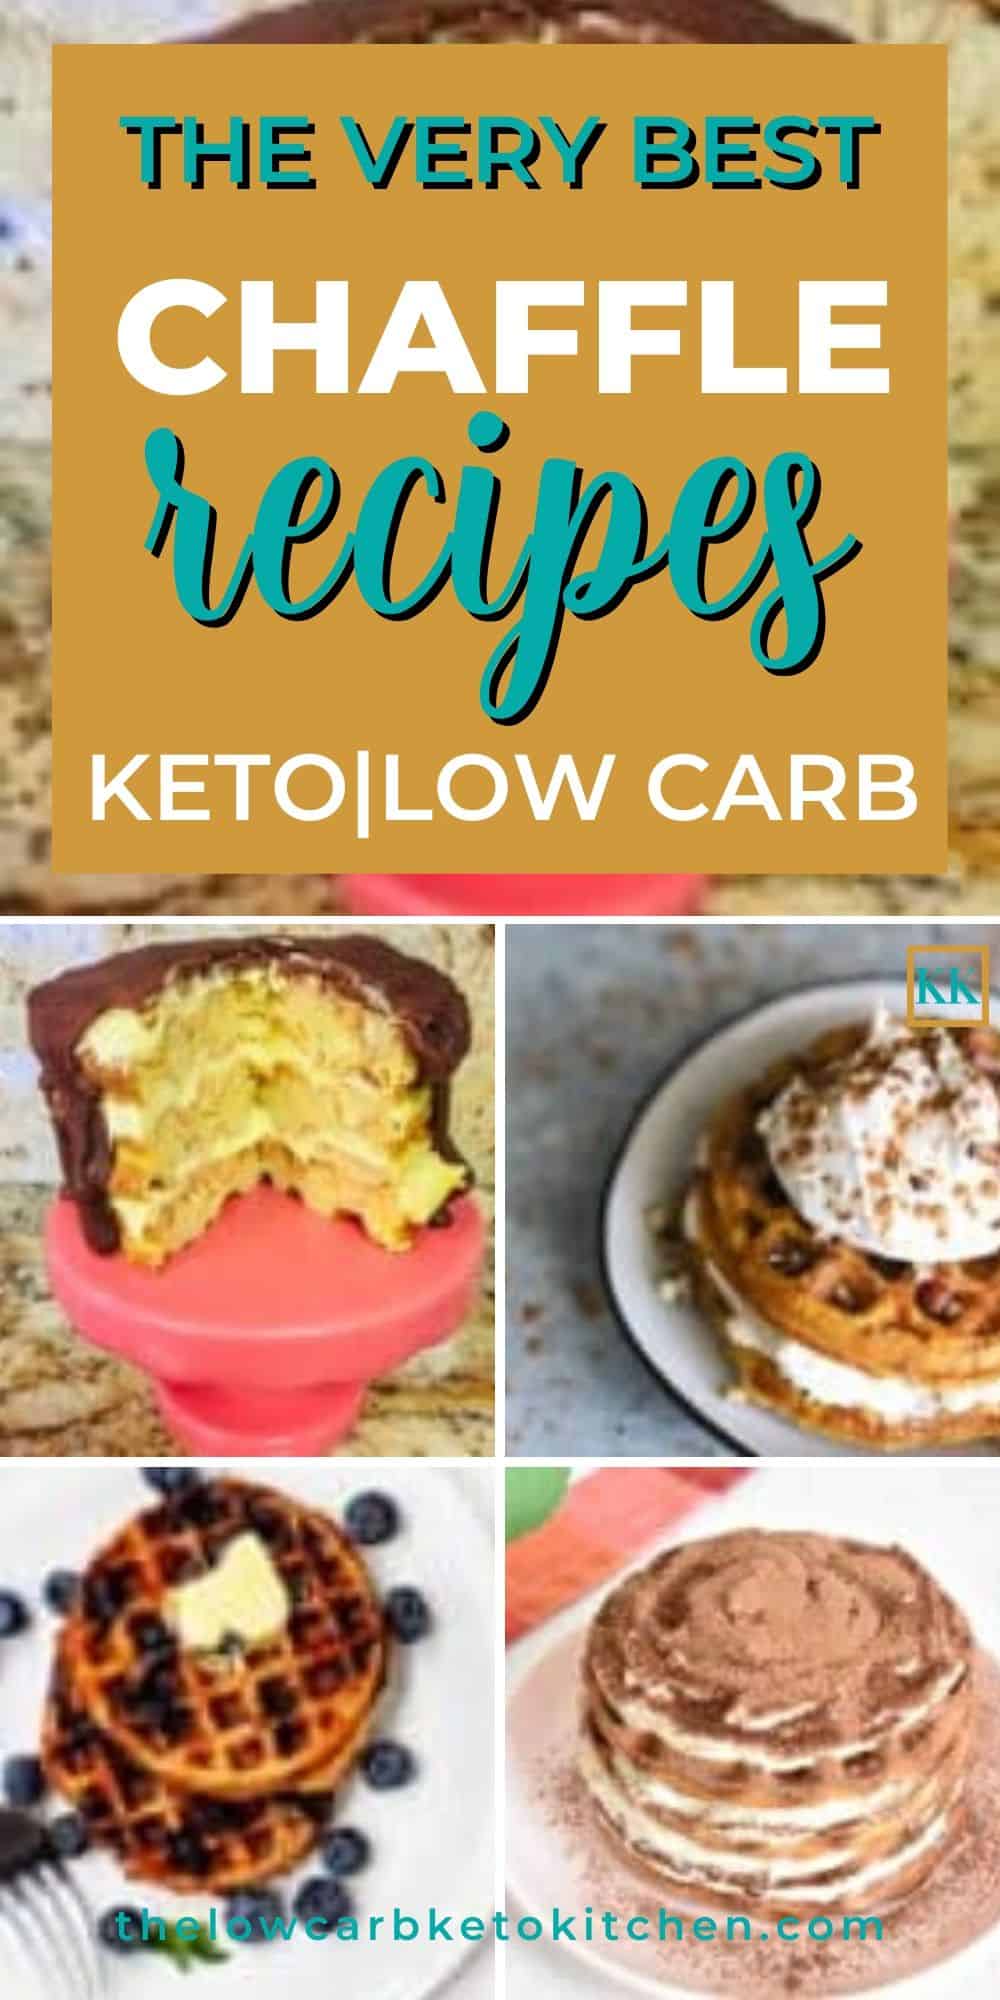 Keto Chaffle Recipes {The New Keto Diet Trend}